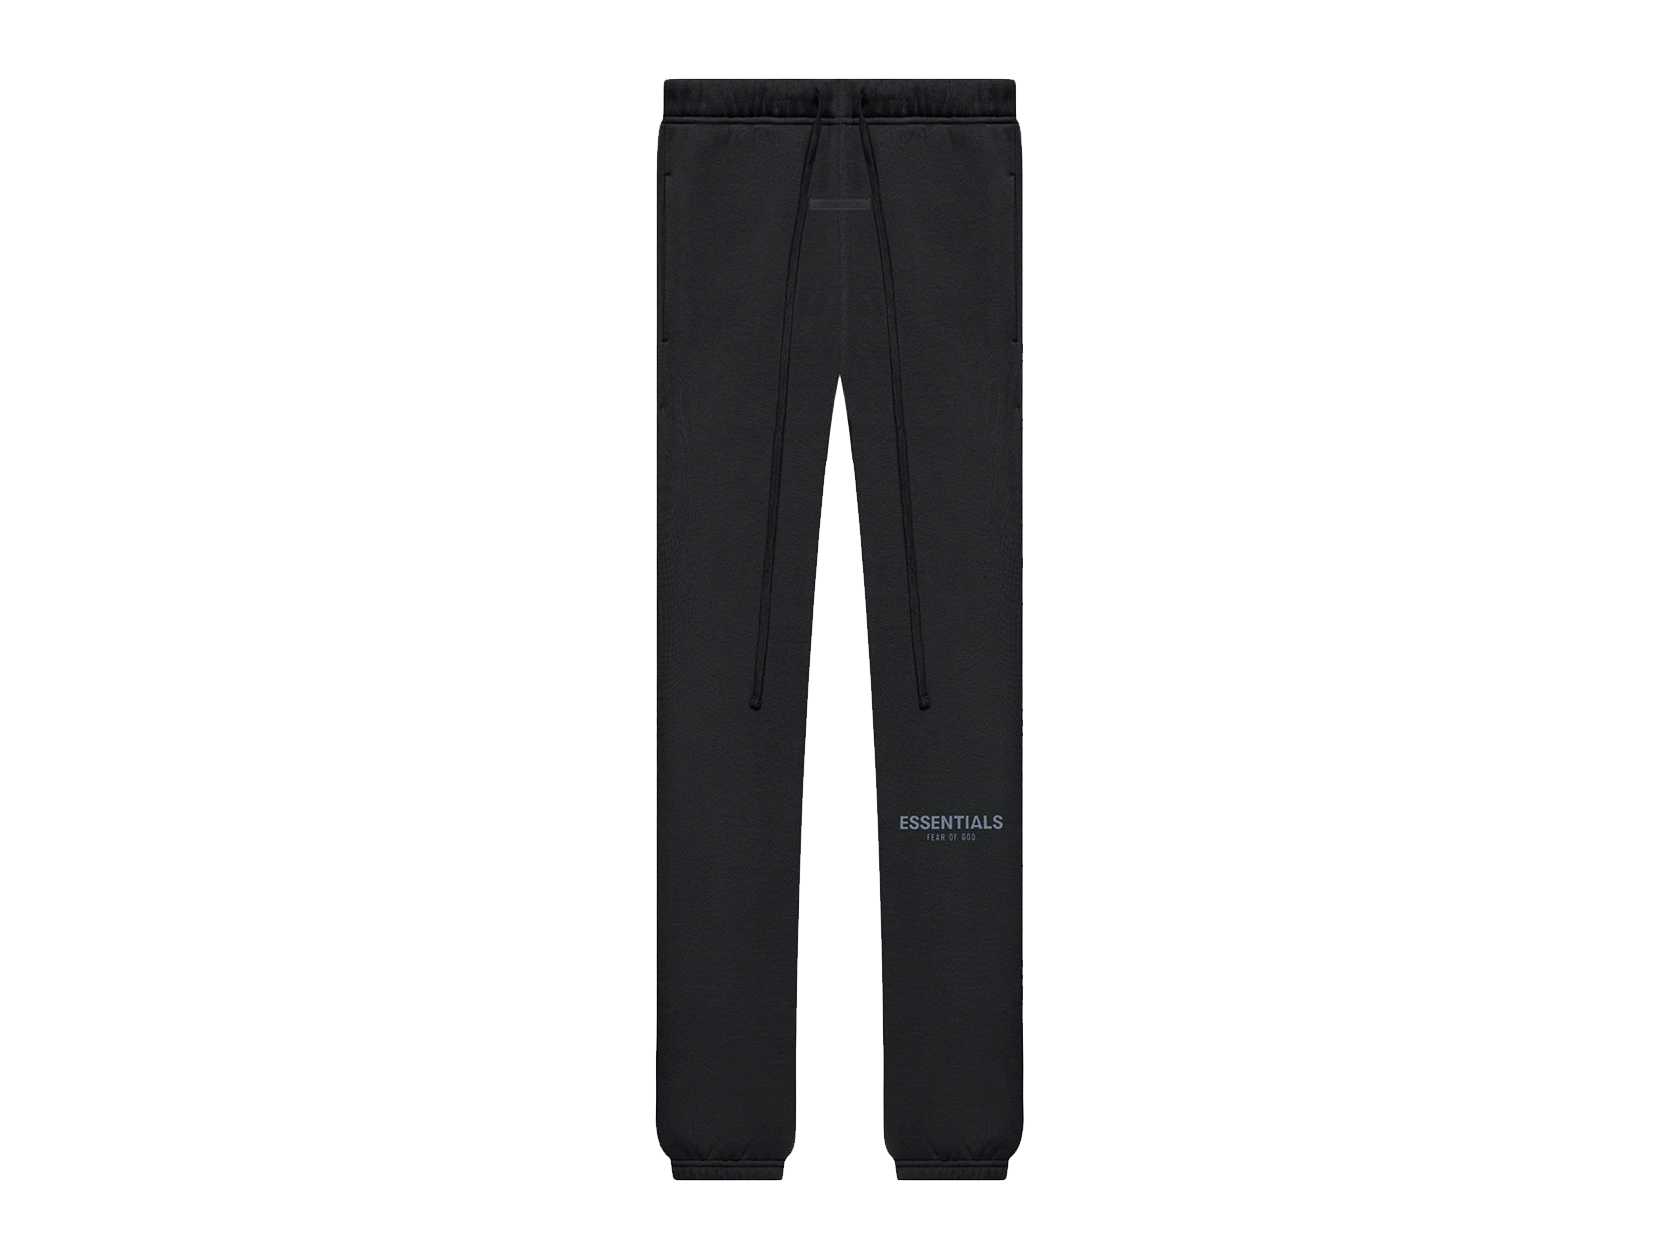 Black Drawstring Lounge Pants by Fear of God ESSENTIALS on Sale